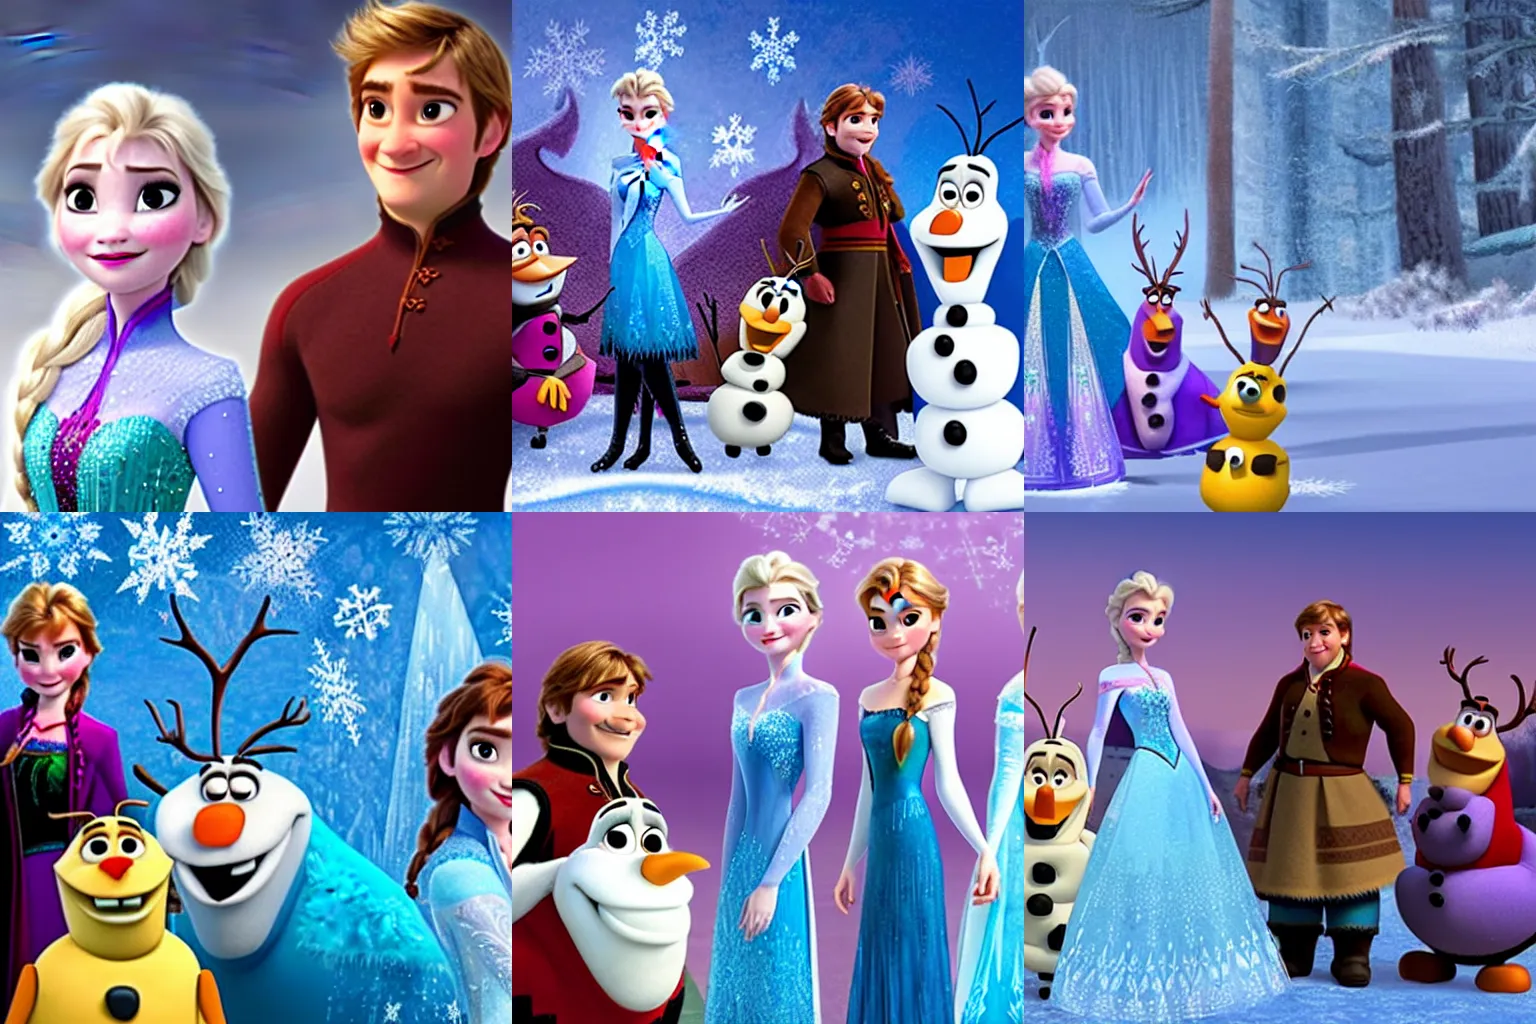 A still from Disney's Frozen where all characters are